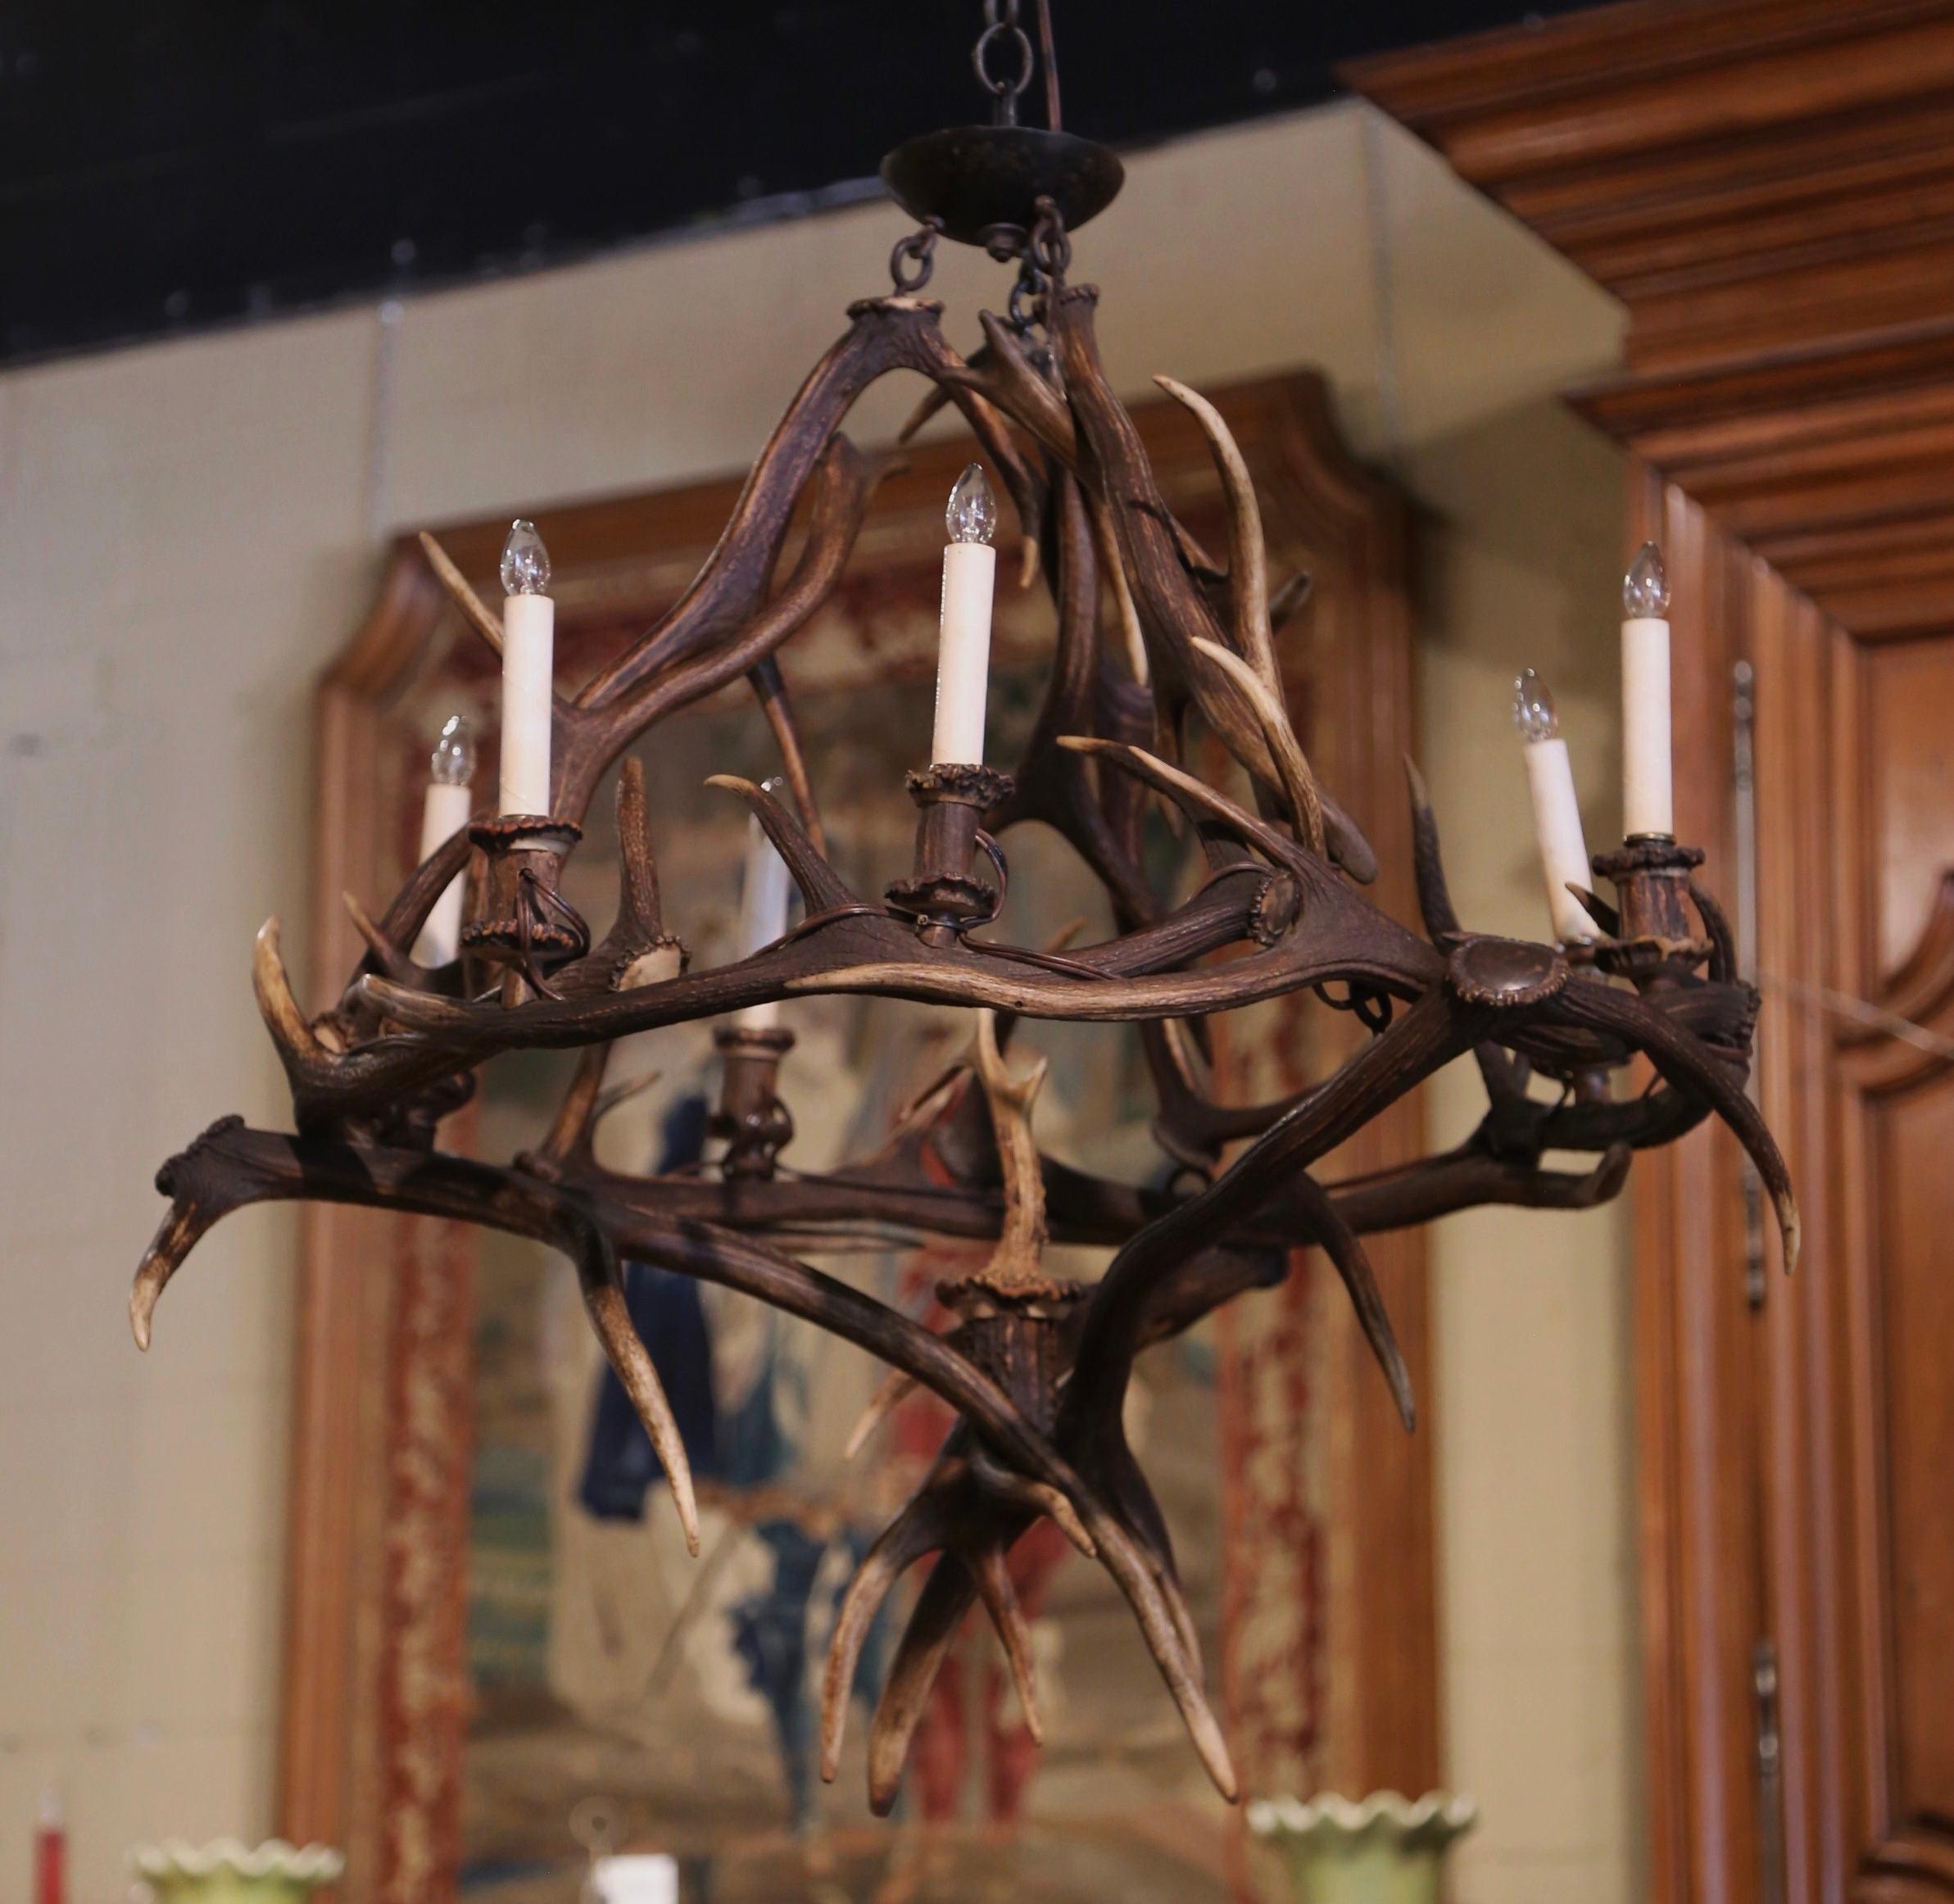 Decorate a ranch or a log cabin with this elegant antique real antler chandelier! Handcrafted in France circa 1920, the large fixture is built using a dozen natural deer horns; it has six lights newly wired and further dressed with horn candle